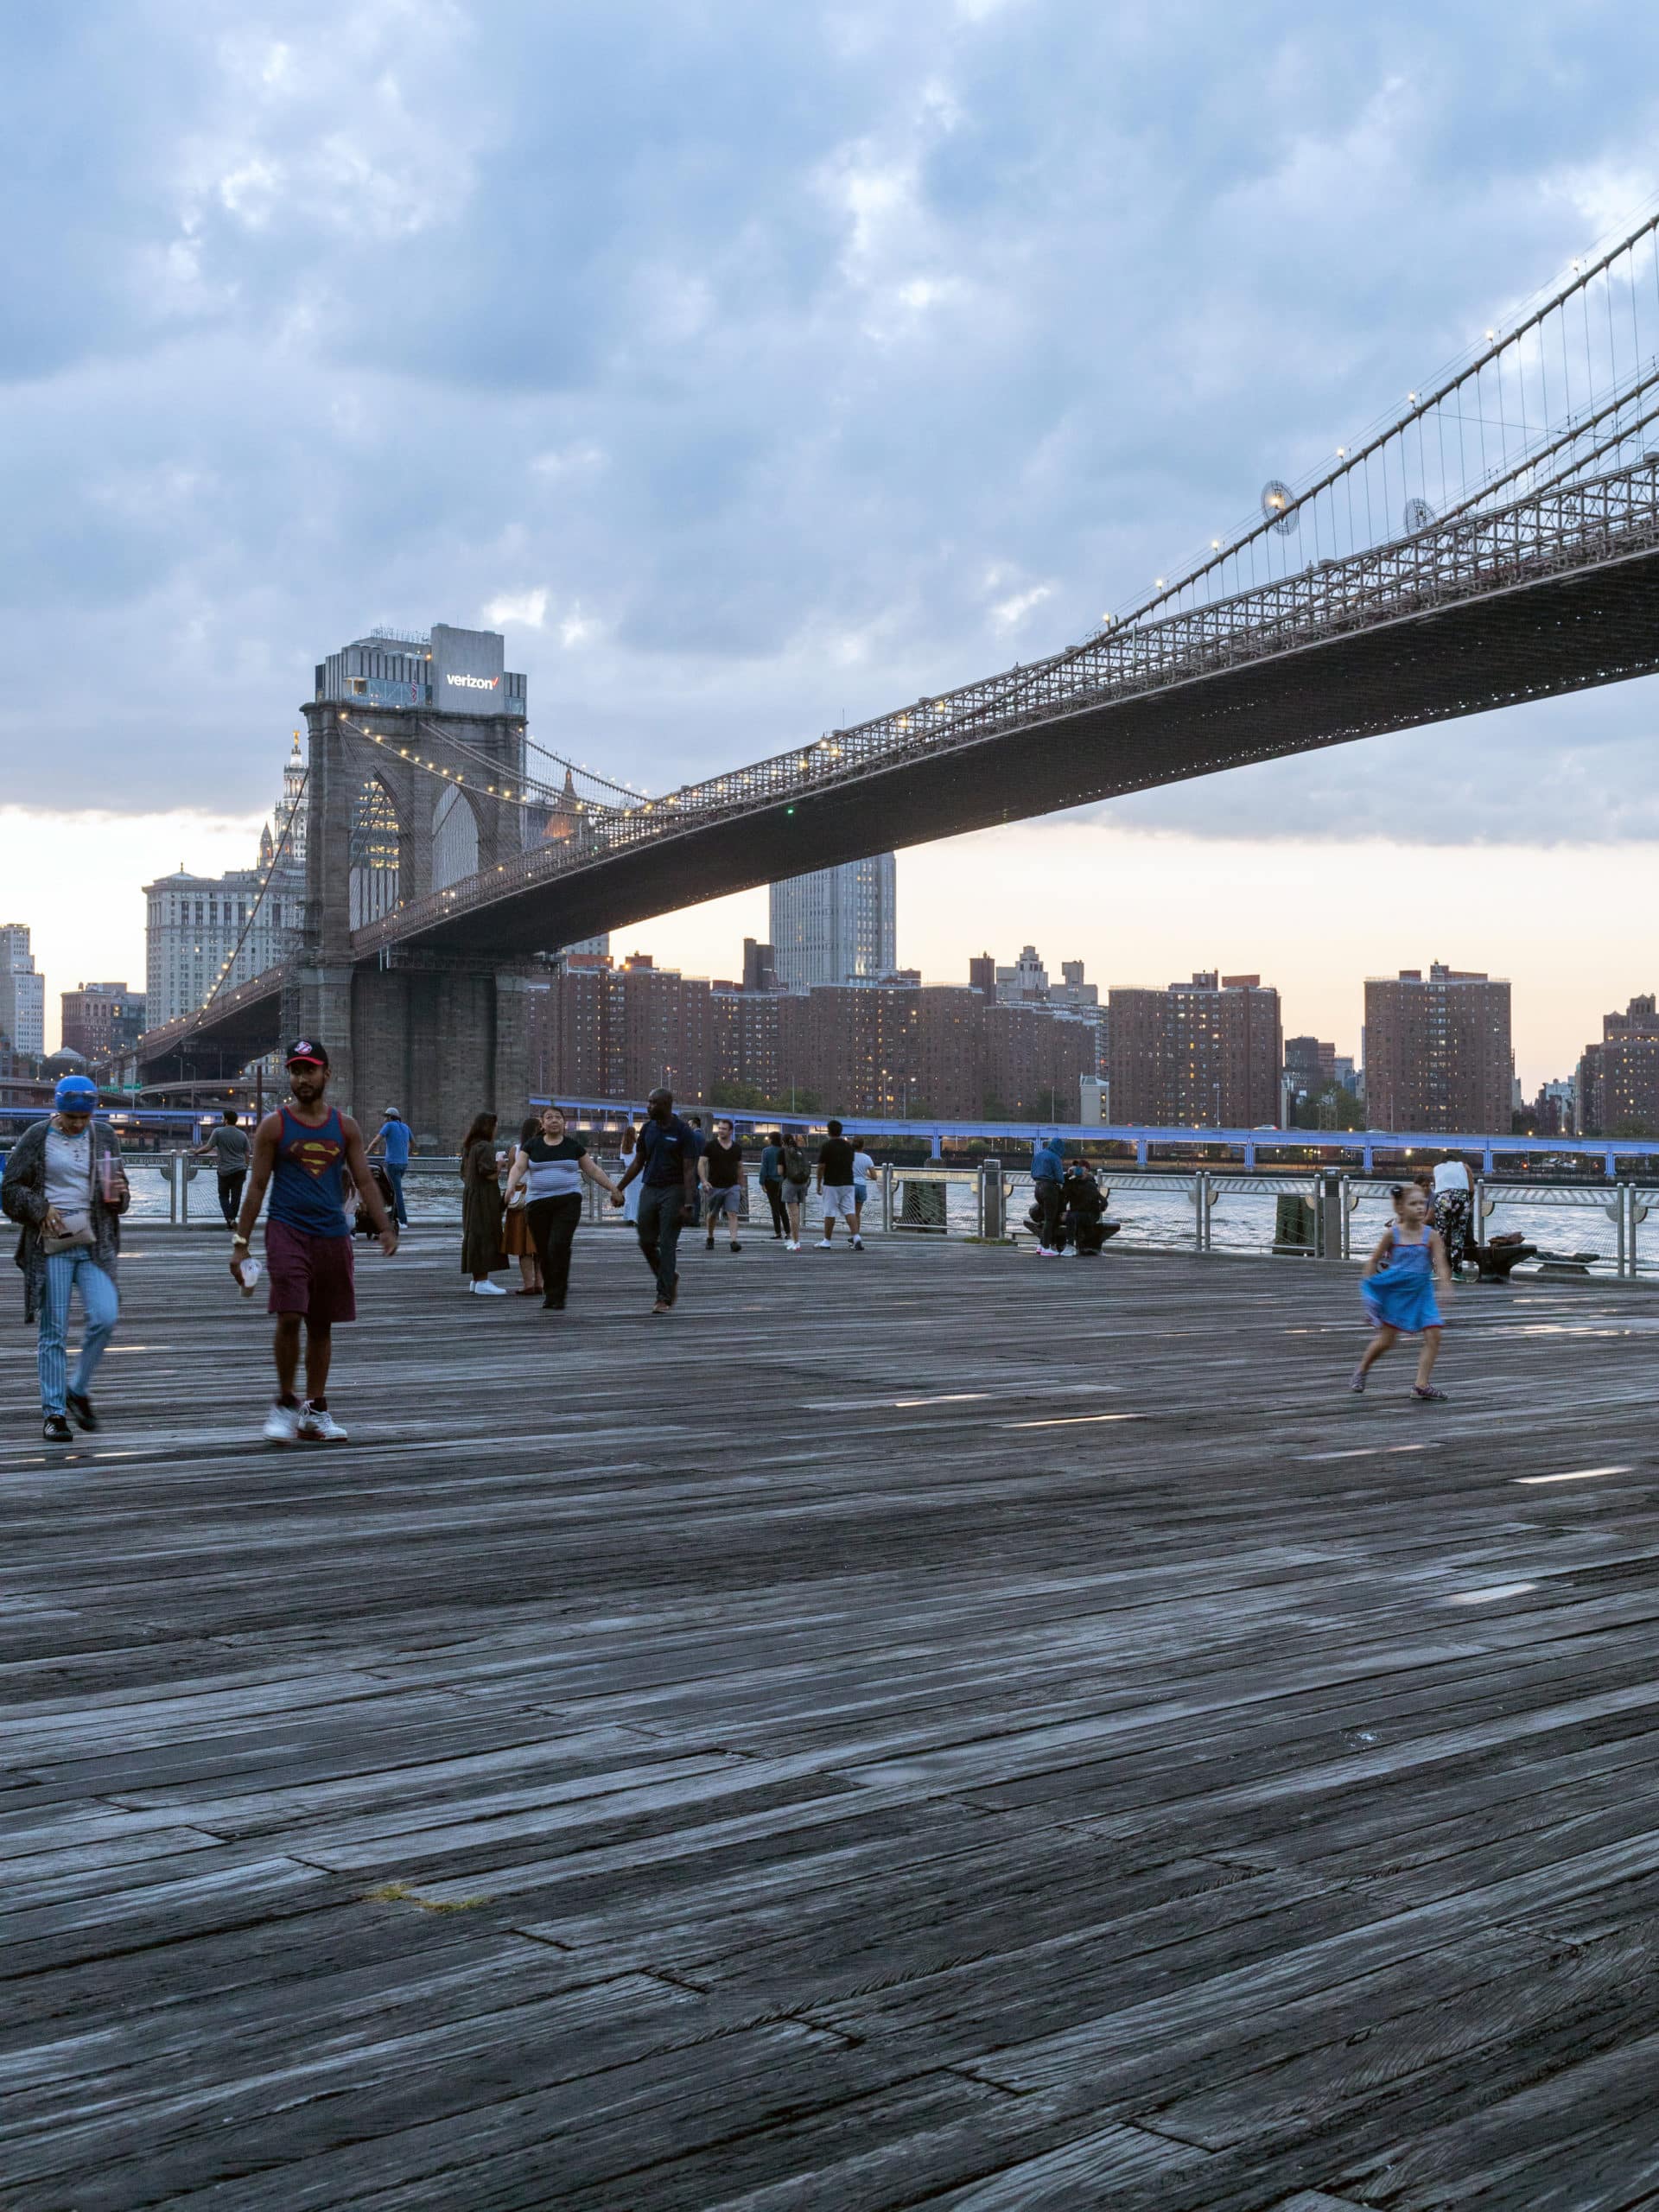 People on the Fulton Ferry Landing Boardwalk at sunset. View of the Brooklyn Bridge and the Lower East Side in the background.